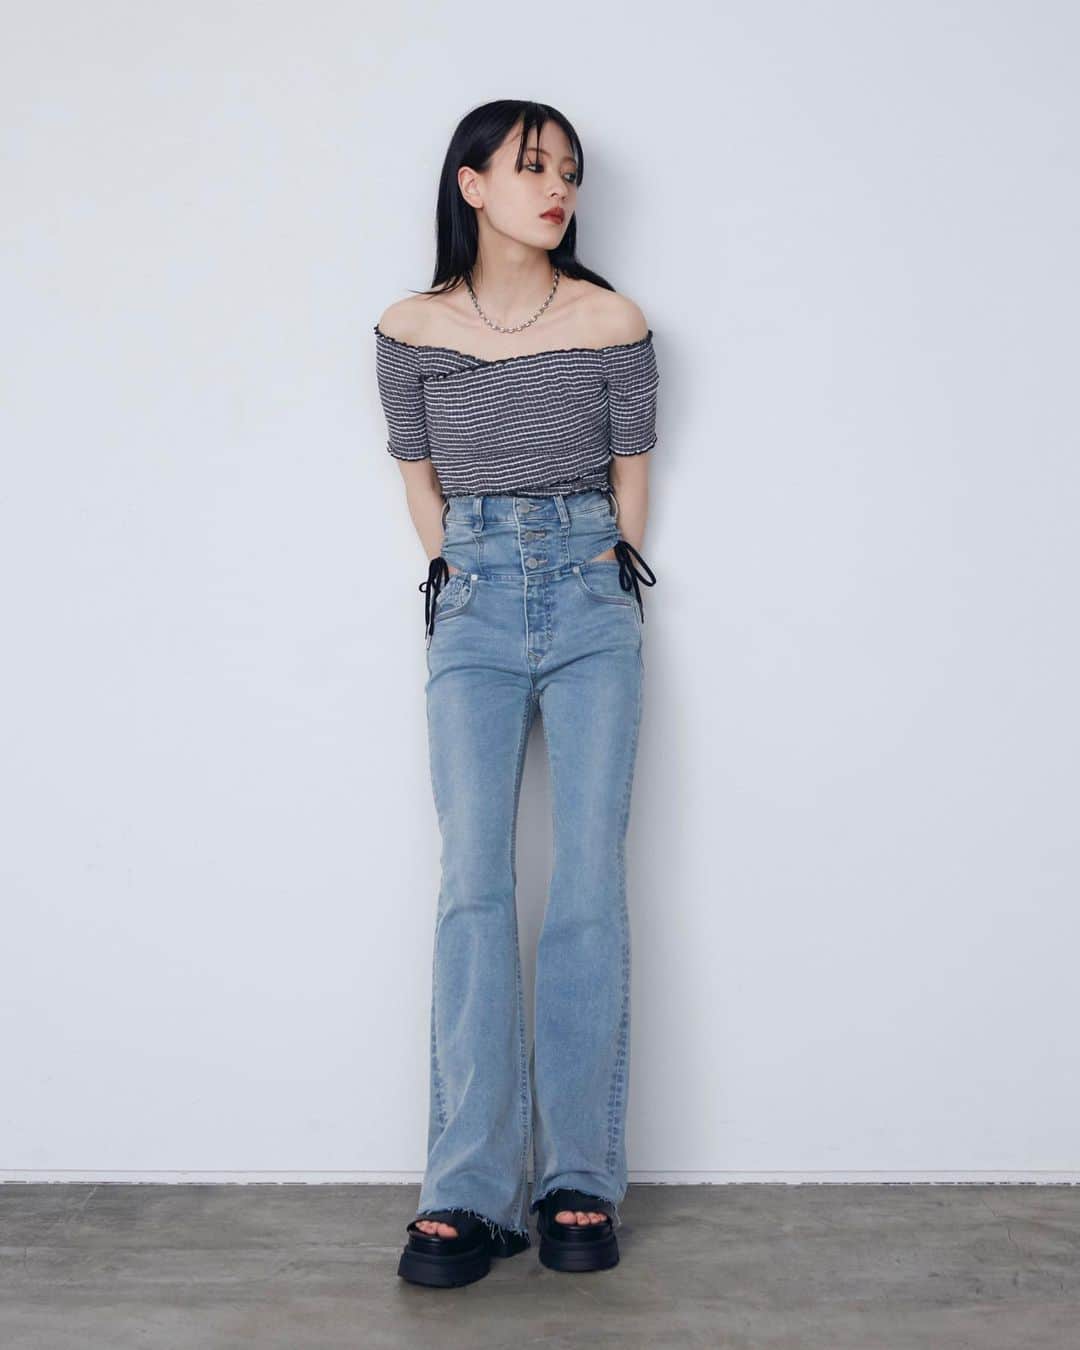 EMODAさんのインスタグラム写真 - (EMODAInstagram)「ㅤㅤㅤ July recommend item ㅤㅤㅤ ㅤㅤㅤㅤㅤㅤ ・FIT CROSS BAND TOP ￥ 5,940 tax'in ・SIDE STRING H/W PAGGINS ￥ 14,080 tax'in ・TANK RUBBER SANDAL ￥ 14,080 tax'in  ・CROSS E CHARM TOP ￥ 6,930 tax'in ＿＿＿＿＿＿＿＿＿＿＿＿＿＿＿＿＿＿＿＿＿＿＿＿ "FINAL SALE" 7/13(thu)12:00～7/17(mon)23:59  MAX60%OFF SALE!!!!  お得に夏物GET出来る最後のチャンス！ お見逃しなく☆彡 ＿＿＿＿＿＿＿＿＿＿＿＿＿＿＿＿＿＿＿＿＿＿＿＿ㅤ  詳細は( @emoda_official )のTOPのURL,storiesチェック✔️ ㅤㅤㅤ ㅤㅤㅤ ㅤㅤㅤ ㅤㅤㅤ ㅤㅤㅤㅤㅤㅤㅤㅤ #EMODA #EMODA_JEANS #EMODA_SHOES #ハイウエストデニム #タンクサンダル #クロップド丈 #デニムコーデ #RUNWAYchannel @emoda_snap」7月15日 18時03分 - emoda_official